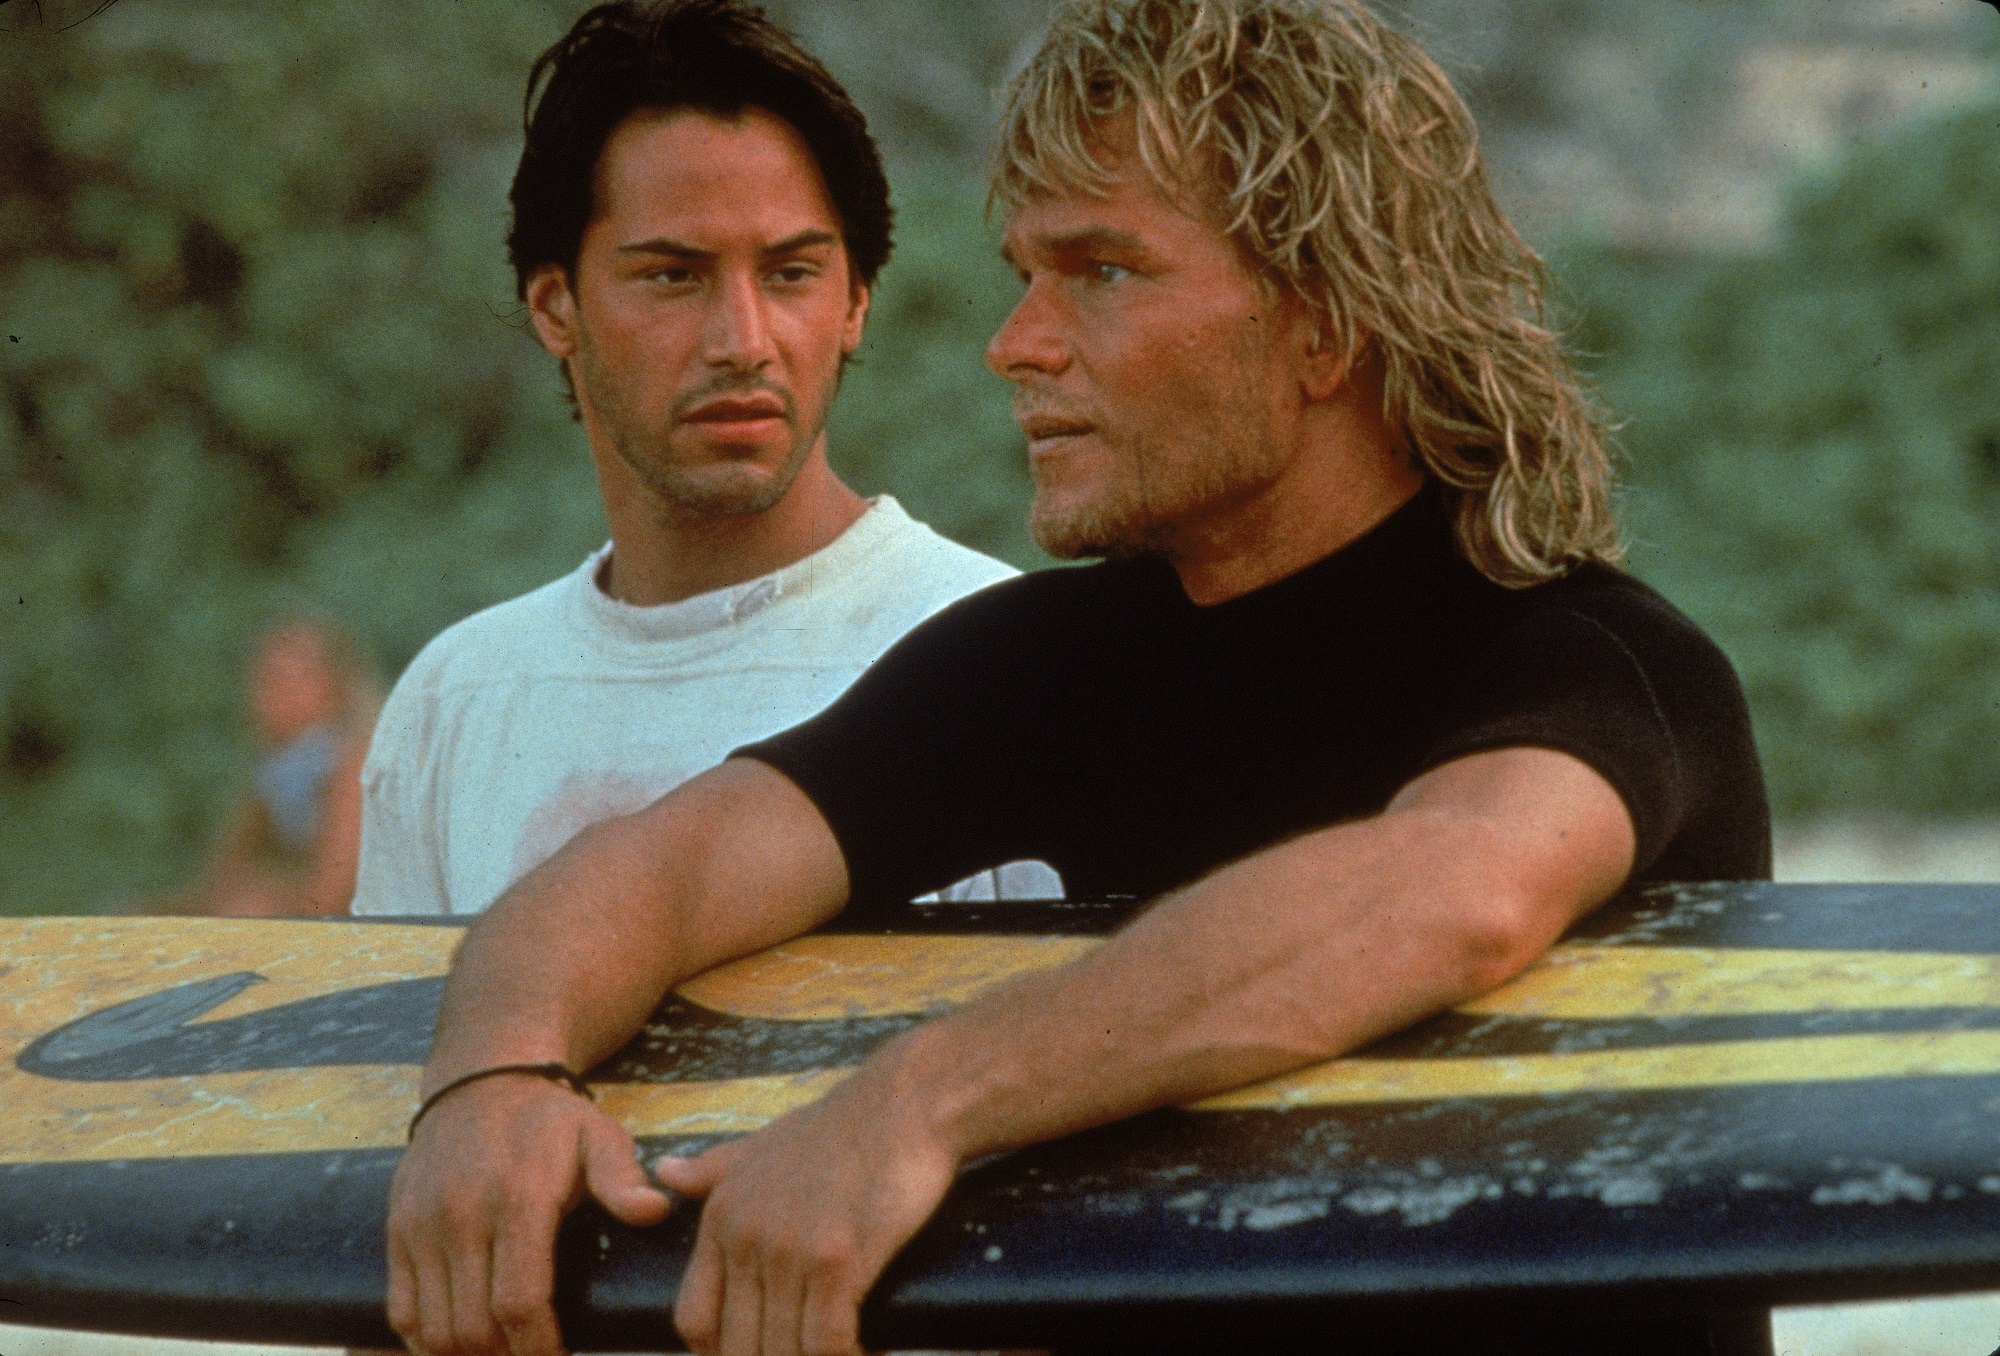 Point Break characters Johnny and Bodhi on the beach after surfing